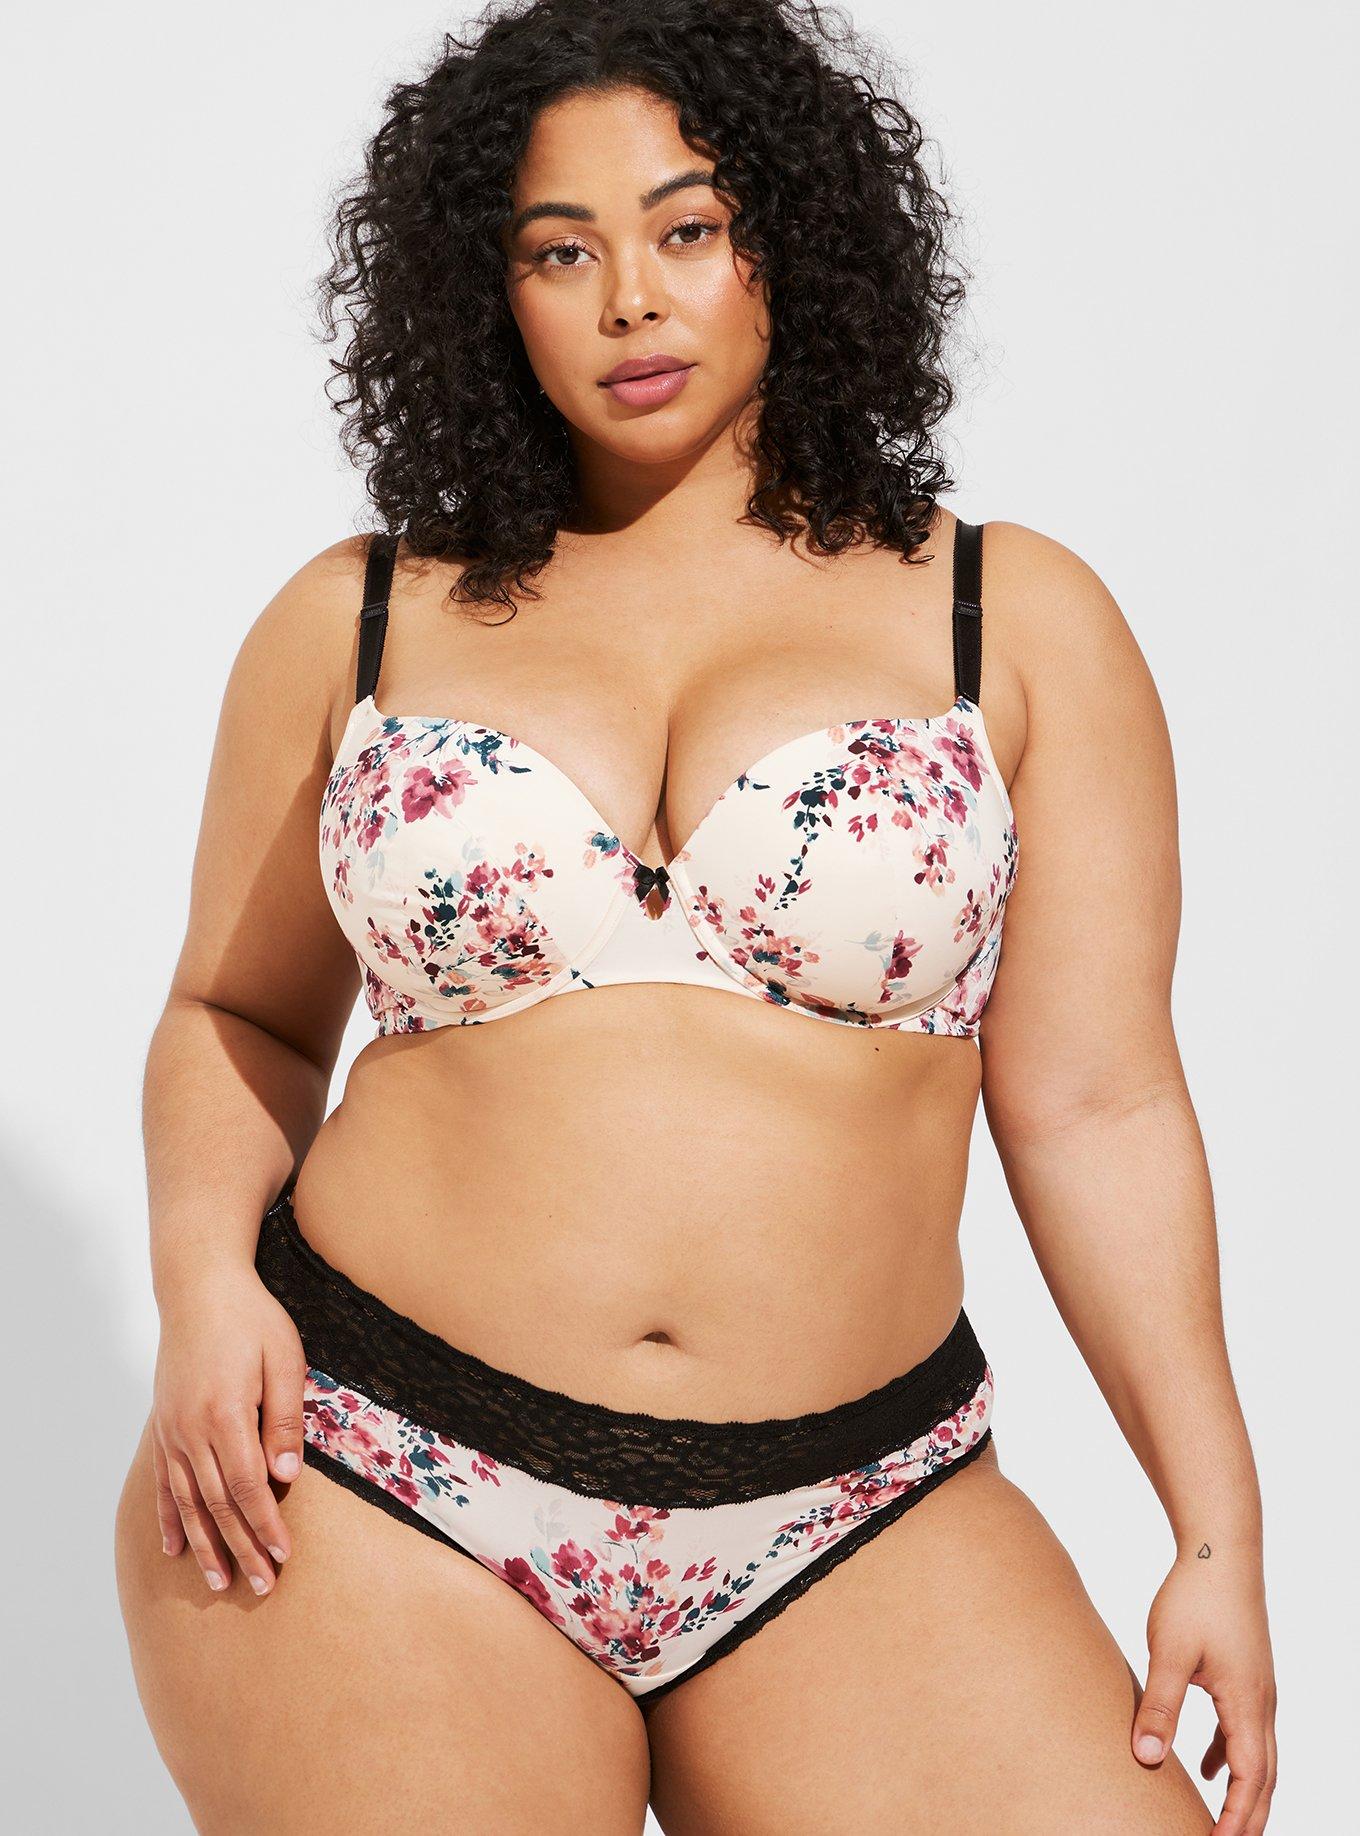 Playful and Bold with the Torrid Super Sexy Lingerie Collection